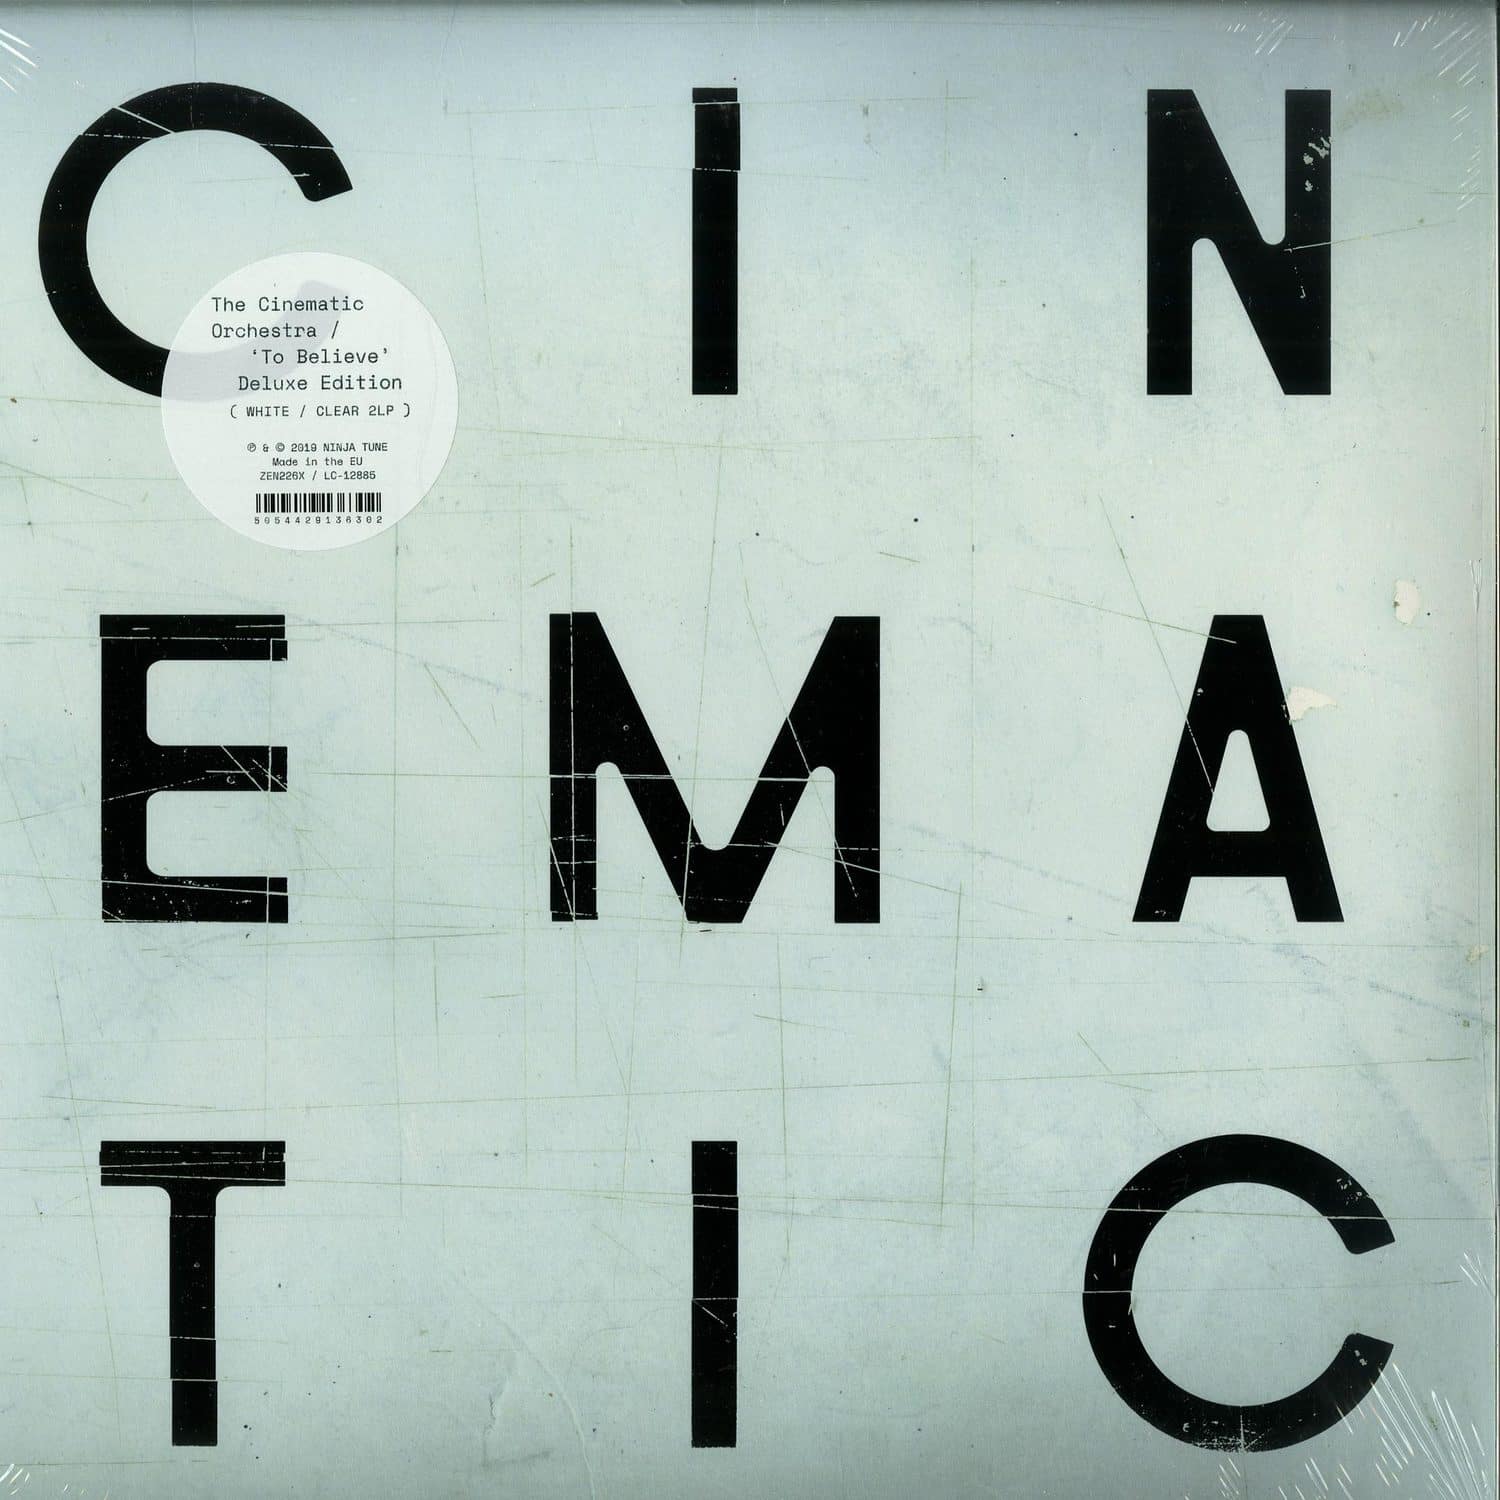 The Cinematic Orchestra - TO BELIEVE 